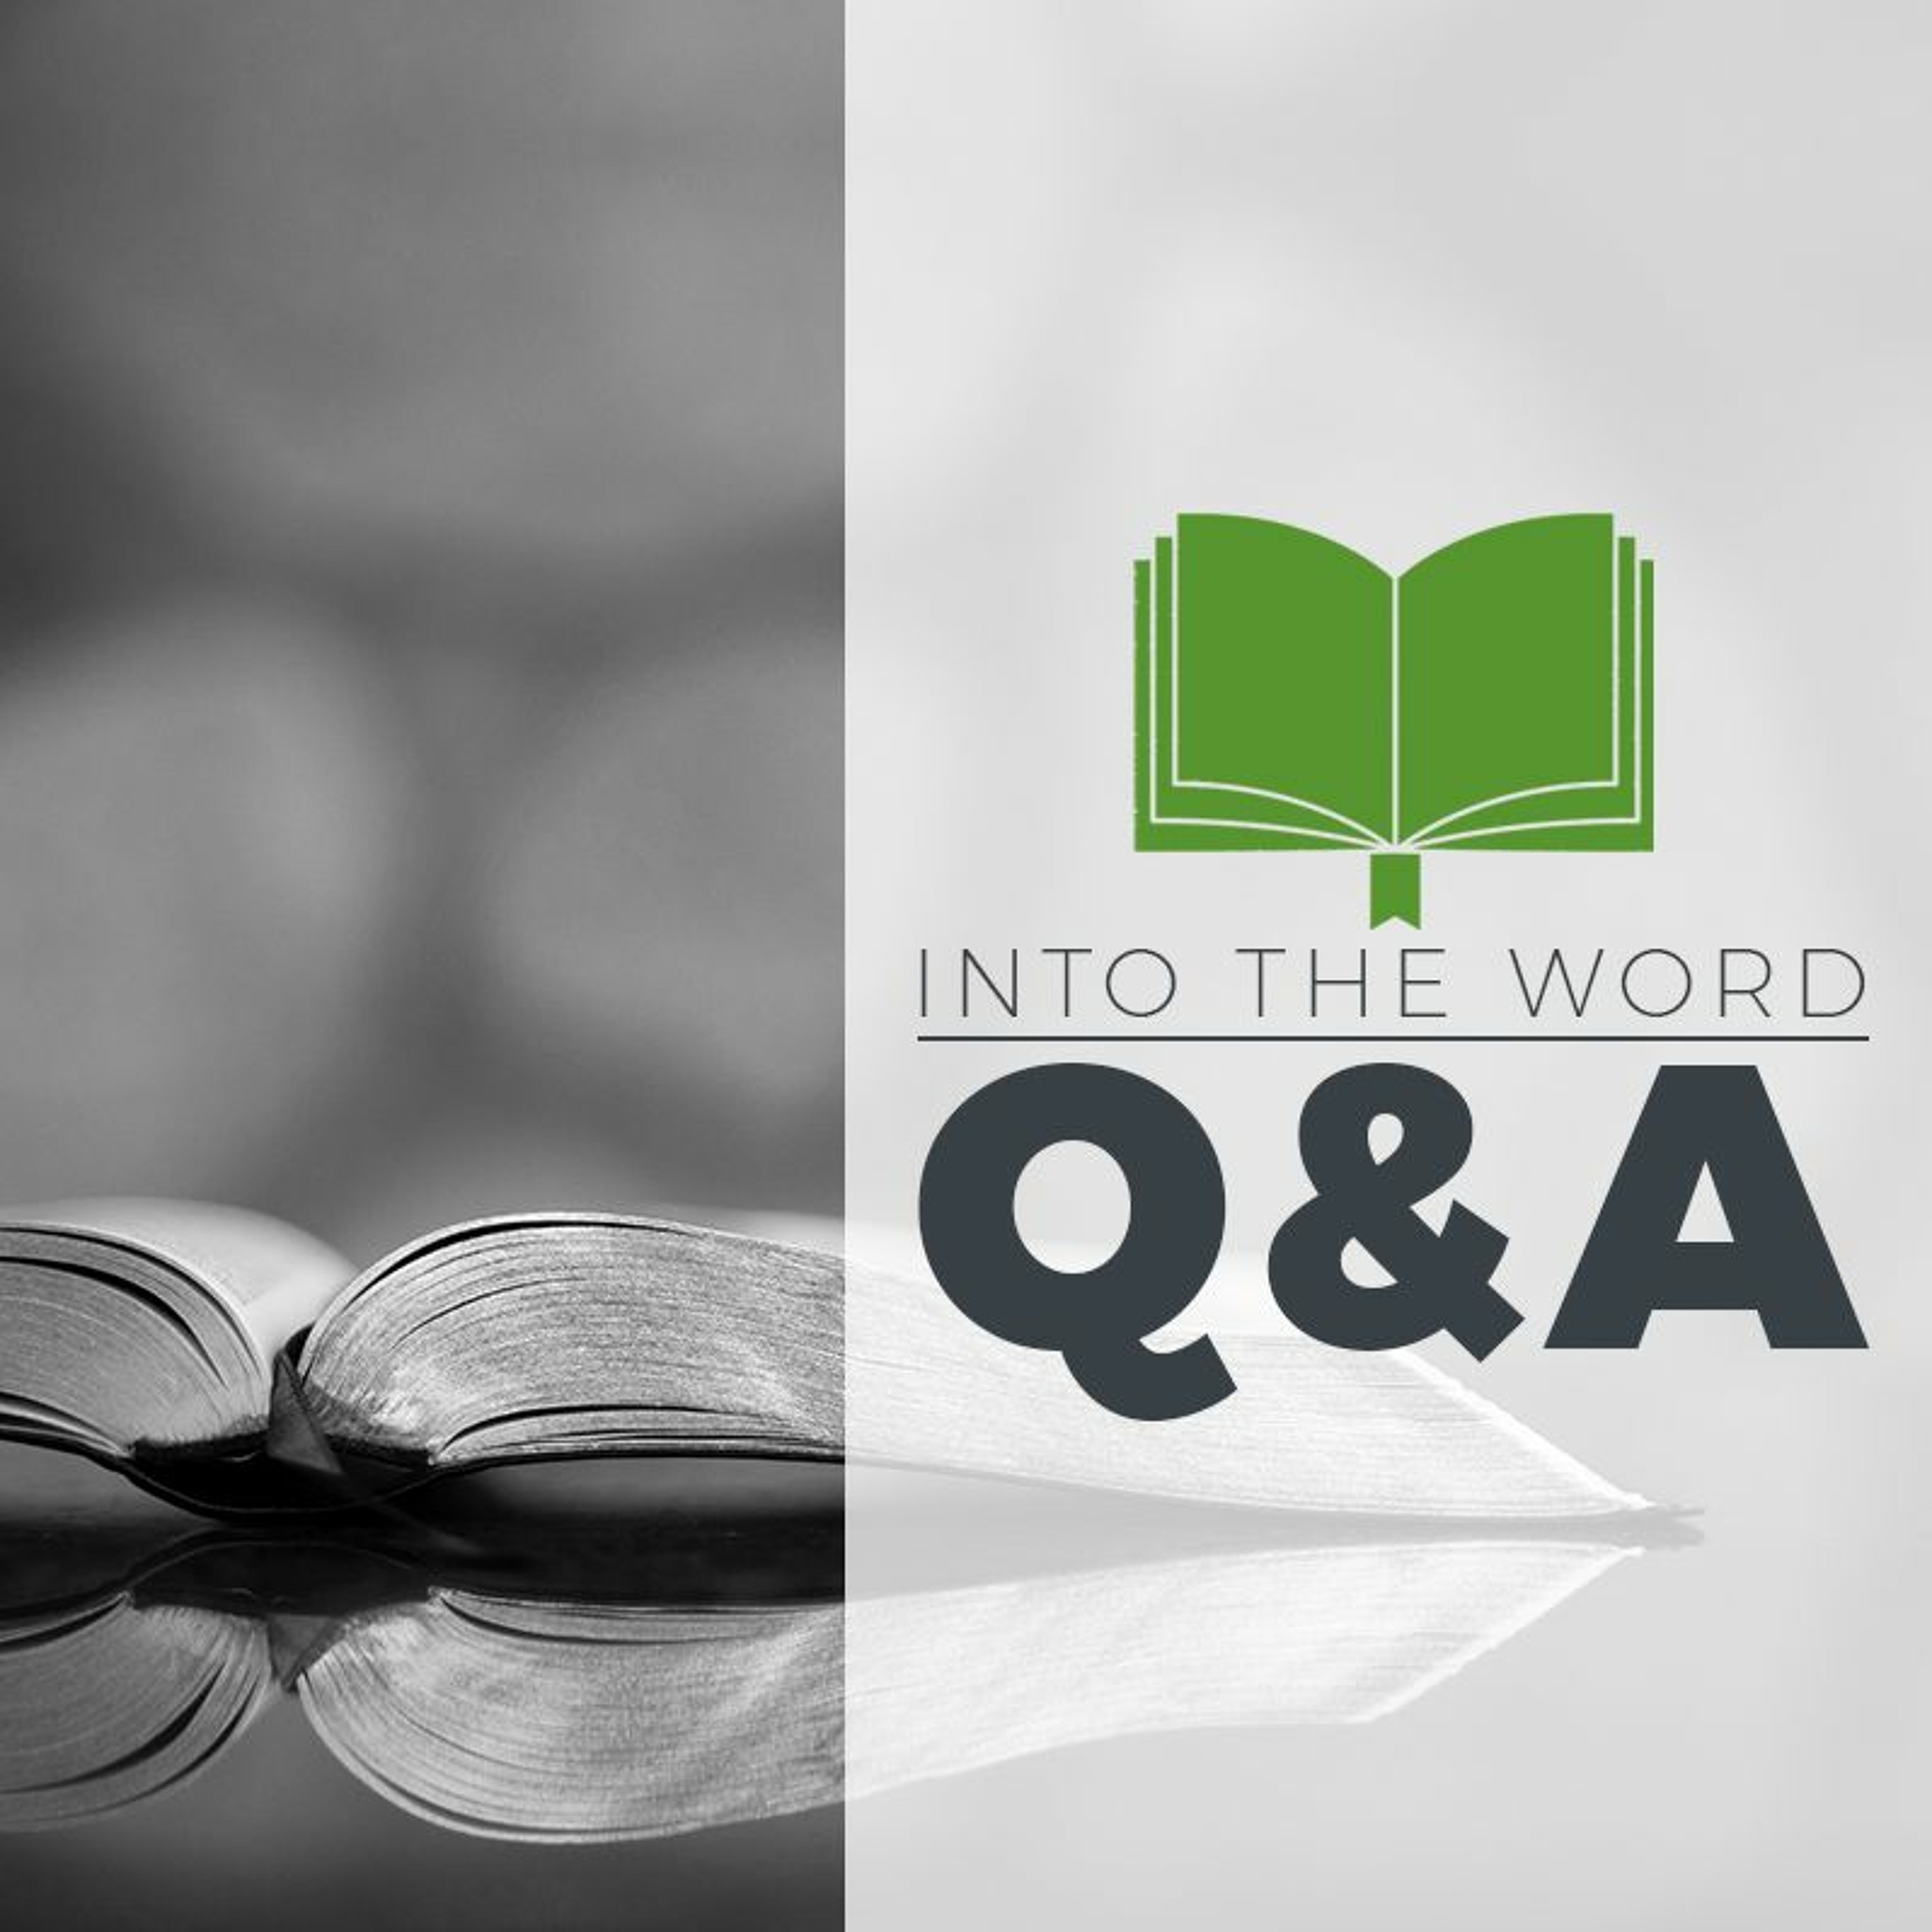 Q&A: On The Topic Of Human Sexuality